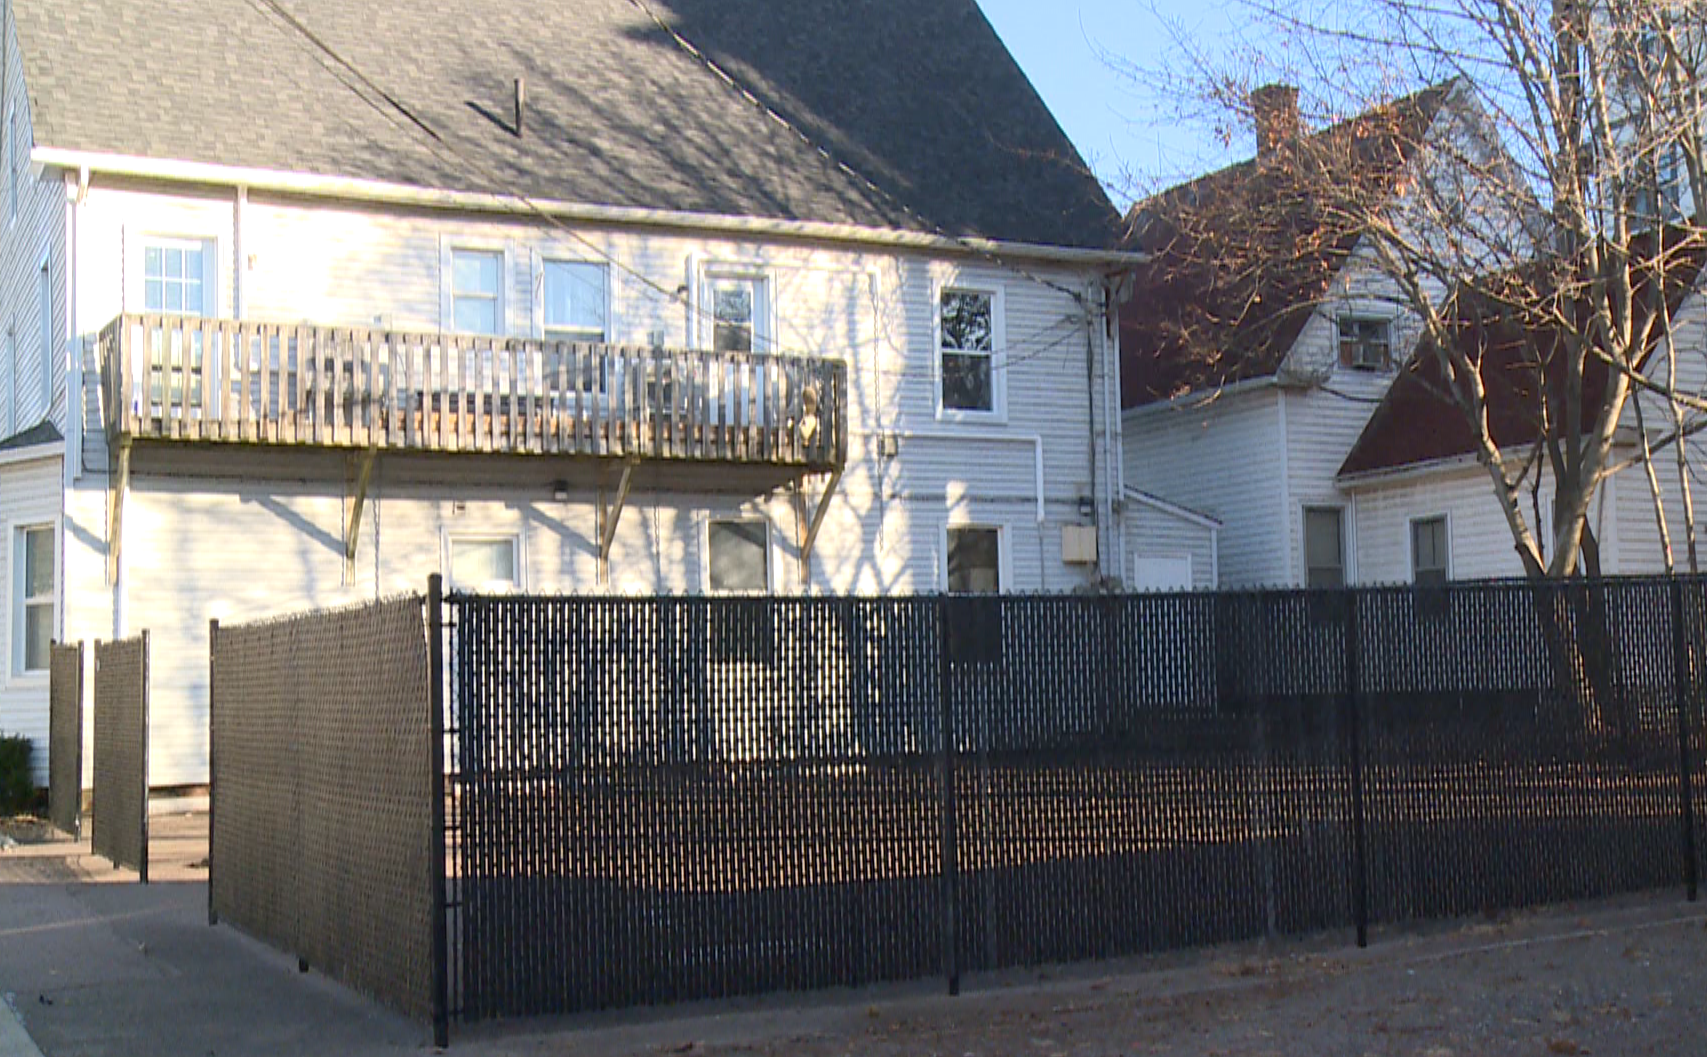 N.B. harm reduction organization adds fence, security to address neighbours’ concerns